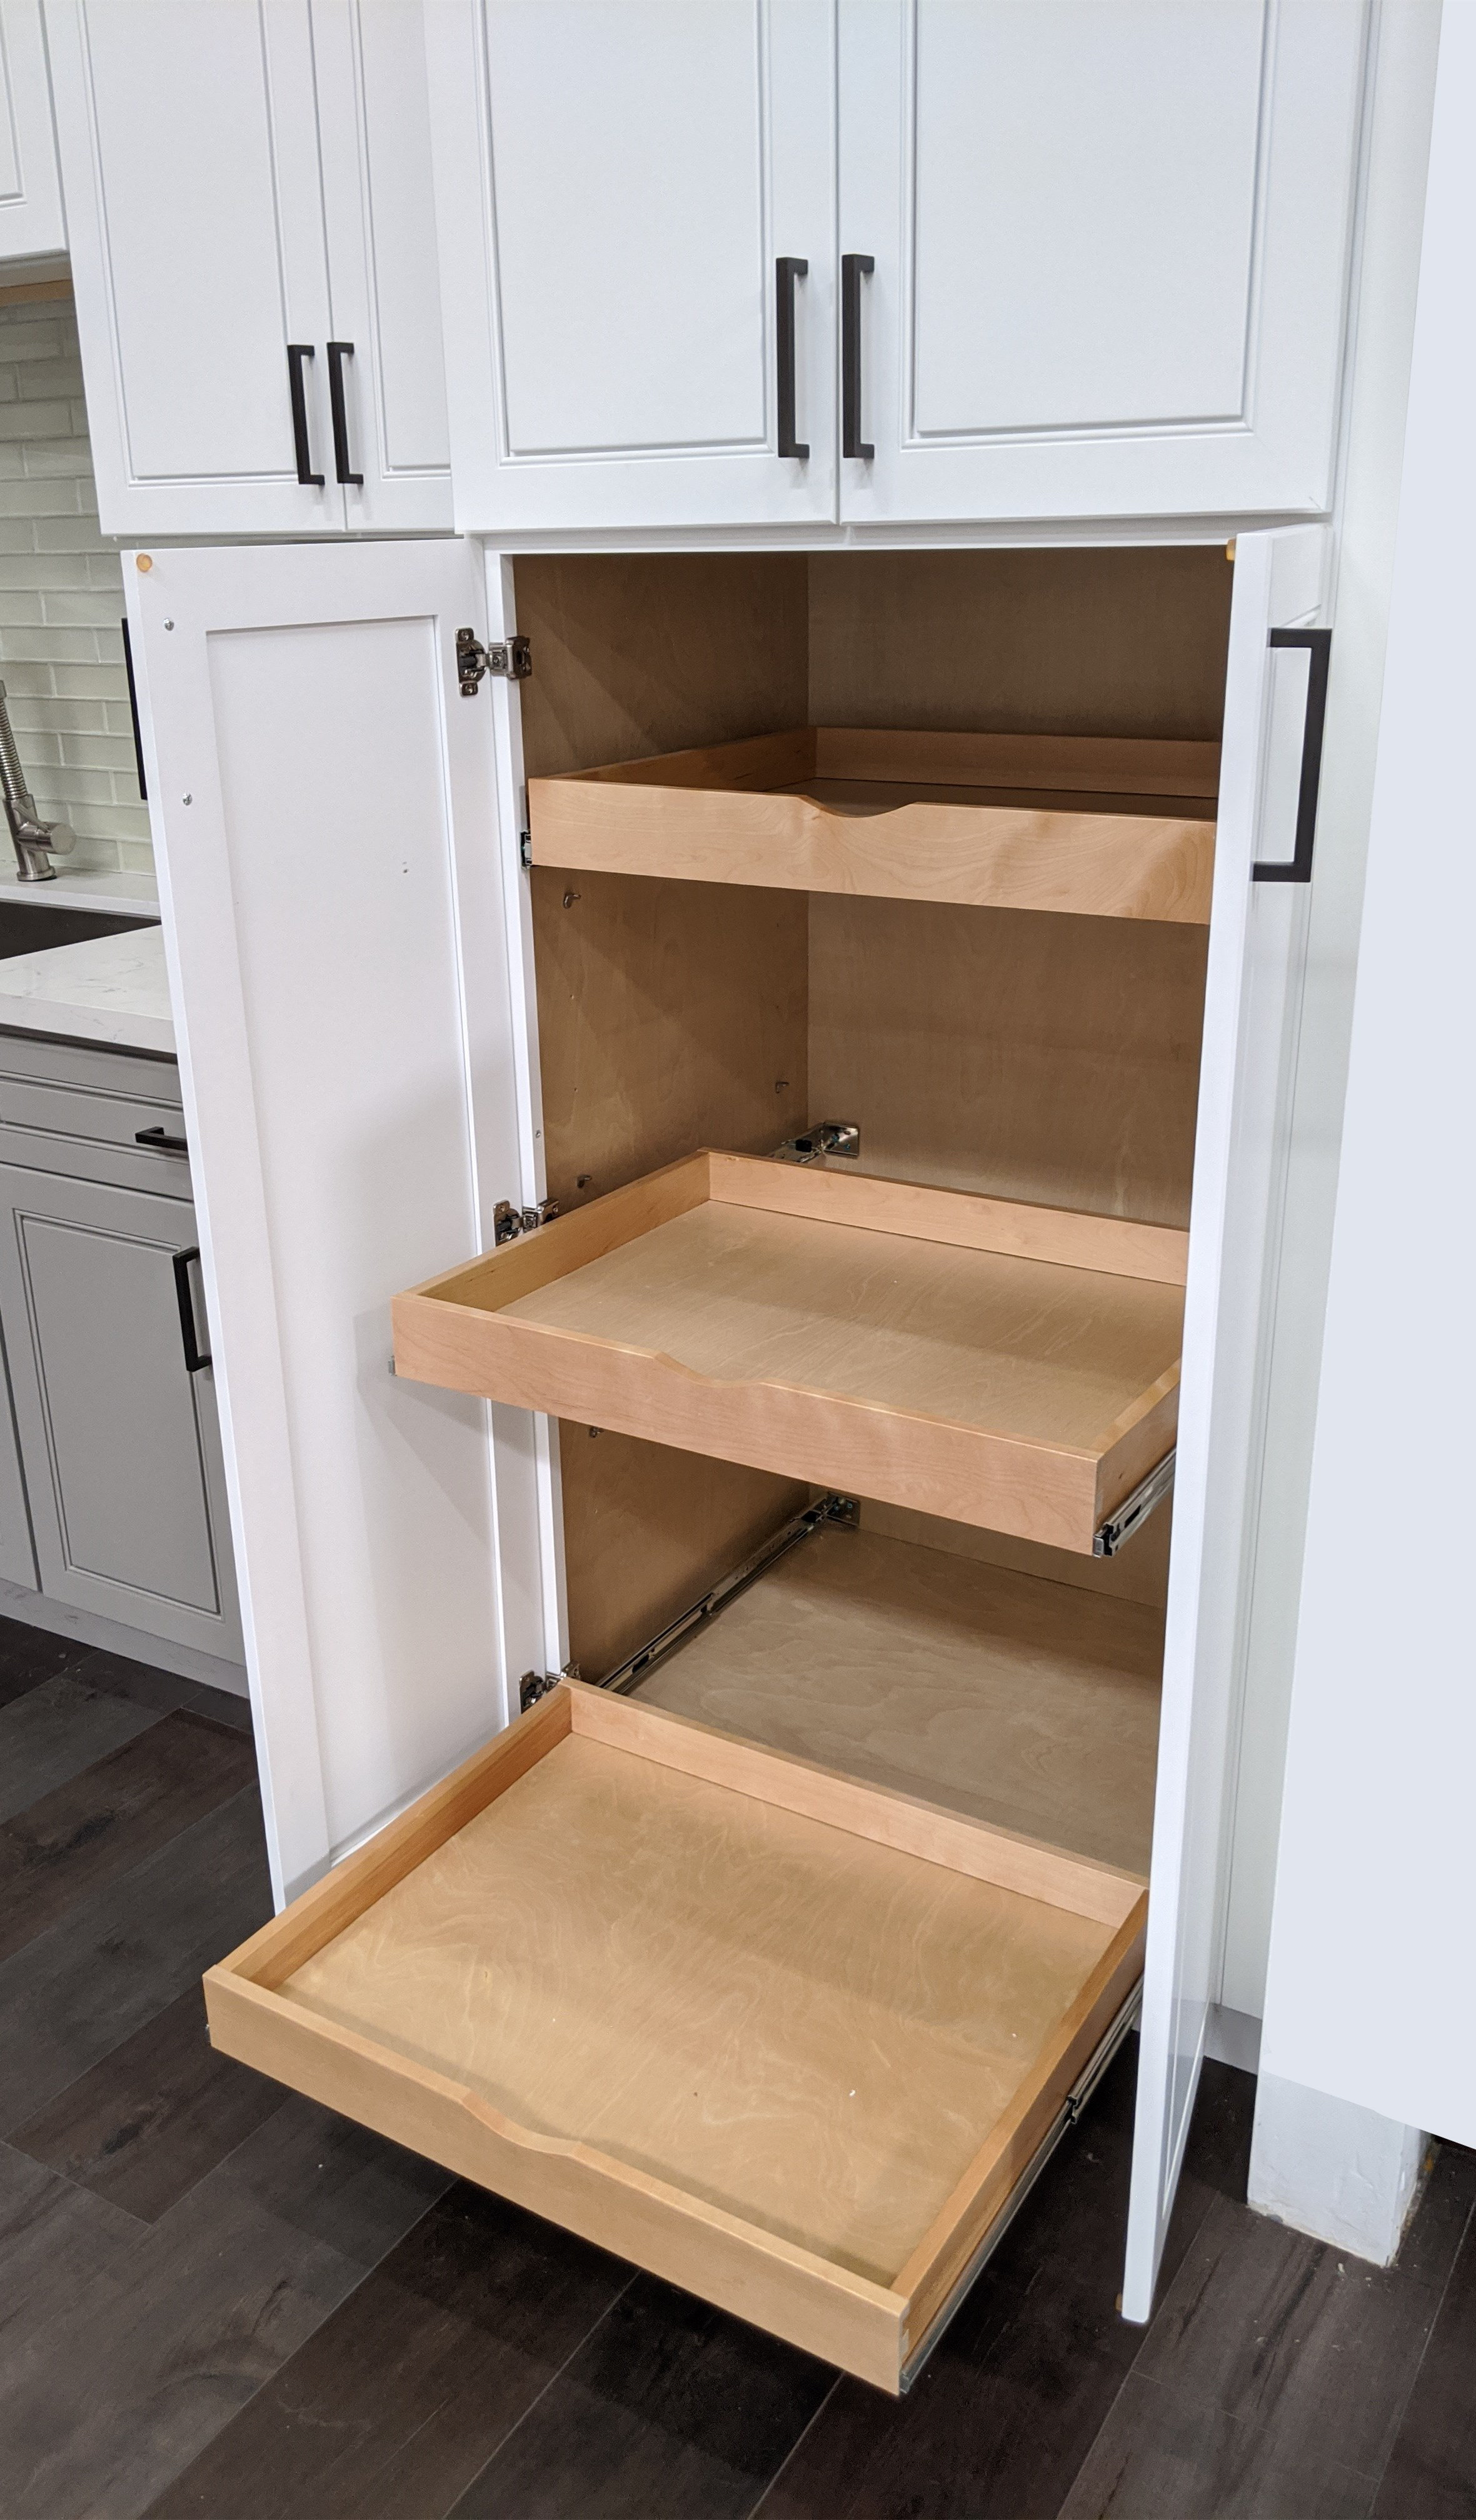 Clista 20 Wood Pull Out Drawers For Kitchen Cabinet Diy Fits Rta Face Frame B24 And Pantry 24 